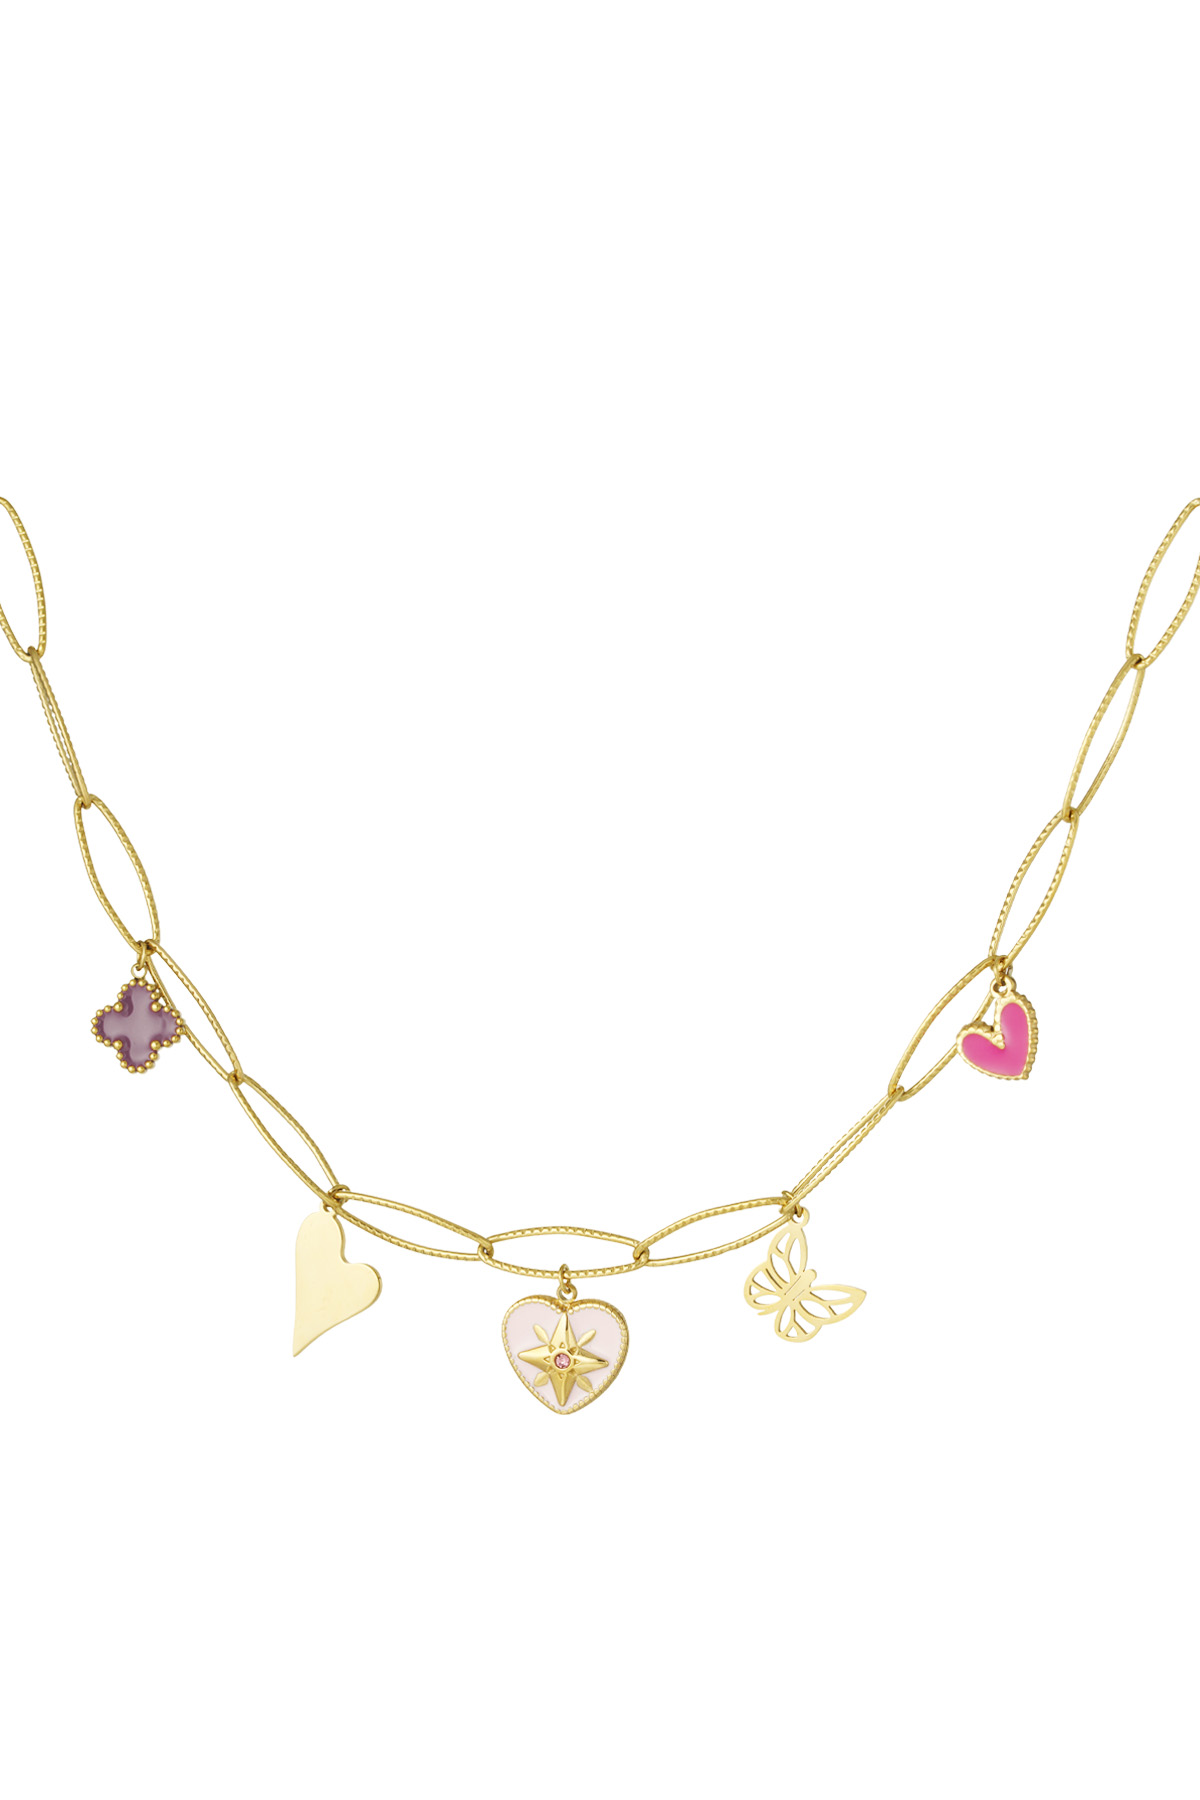 Lovely butterfly charm necklaces - gold